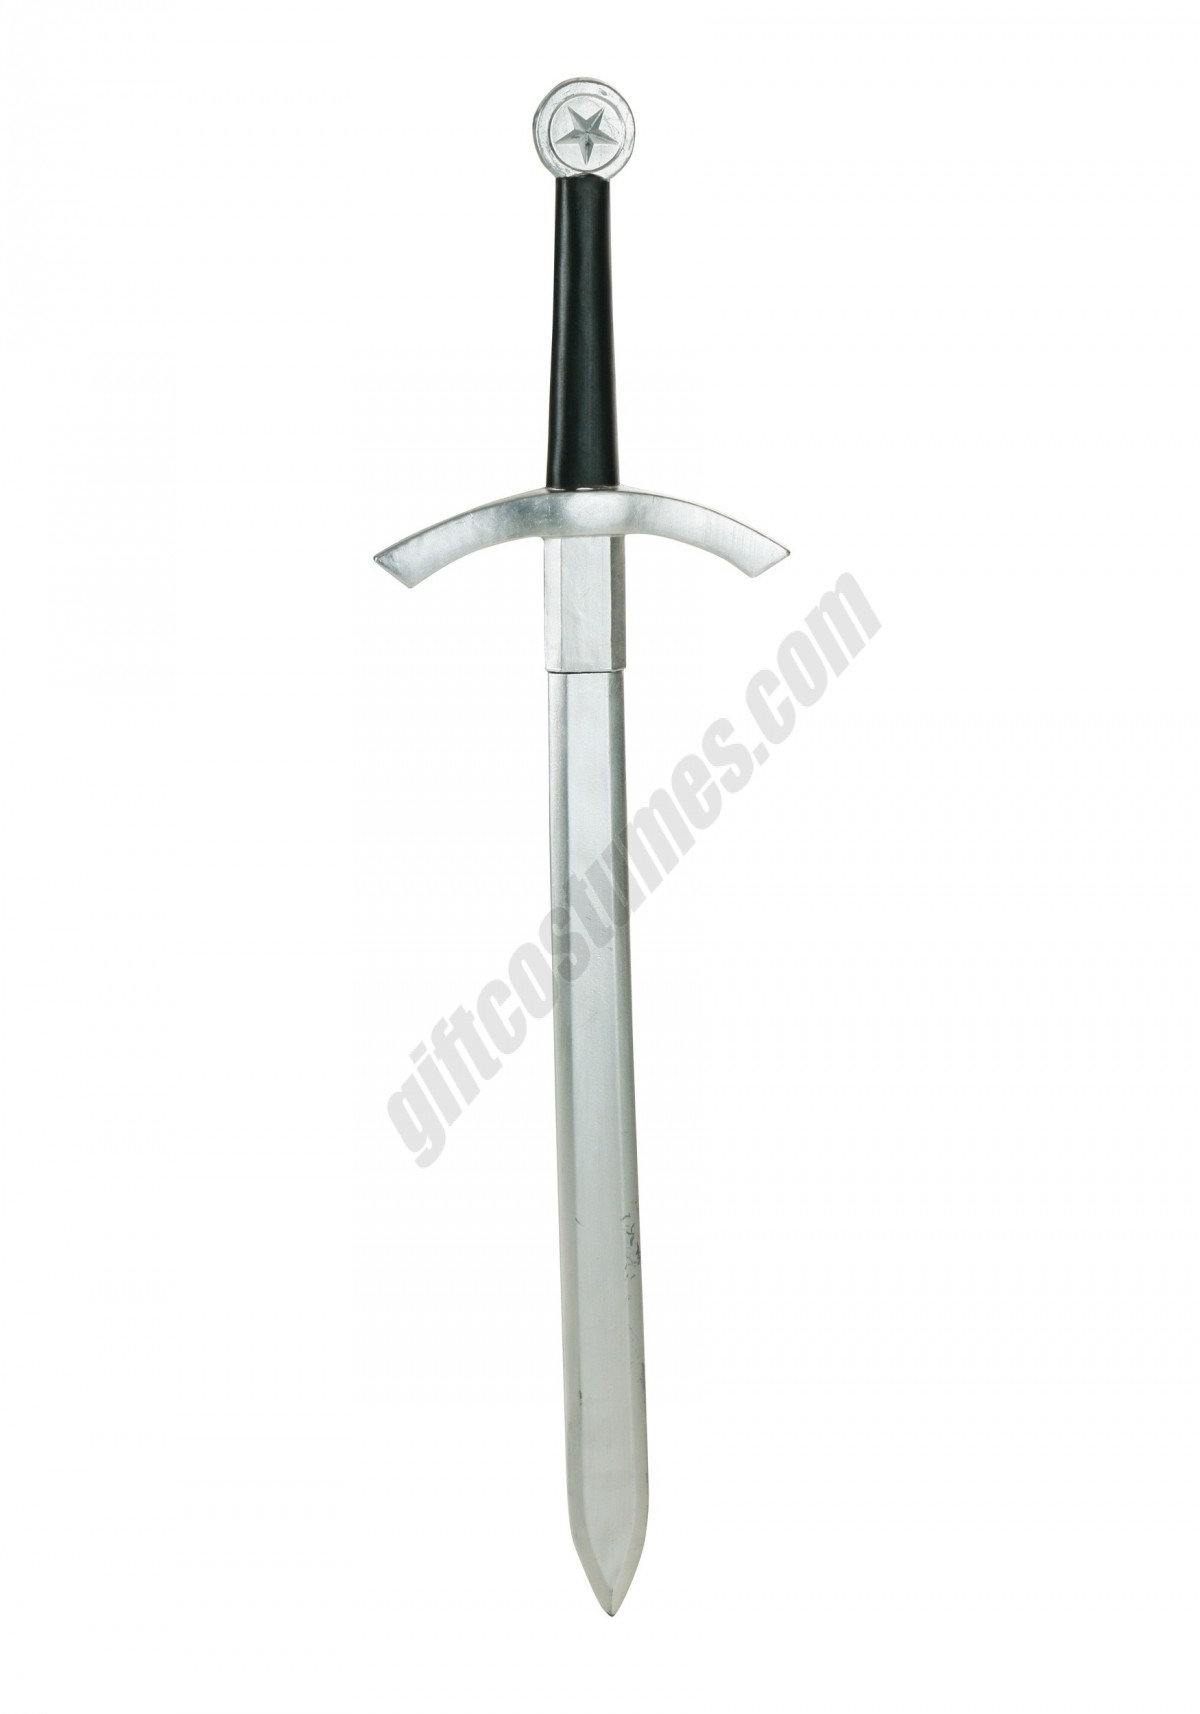 Medieval Battle Knight's Sword Promotions - -0